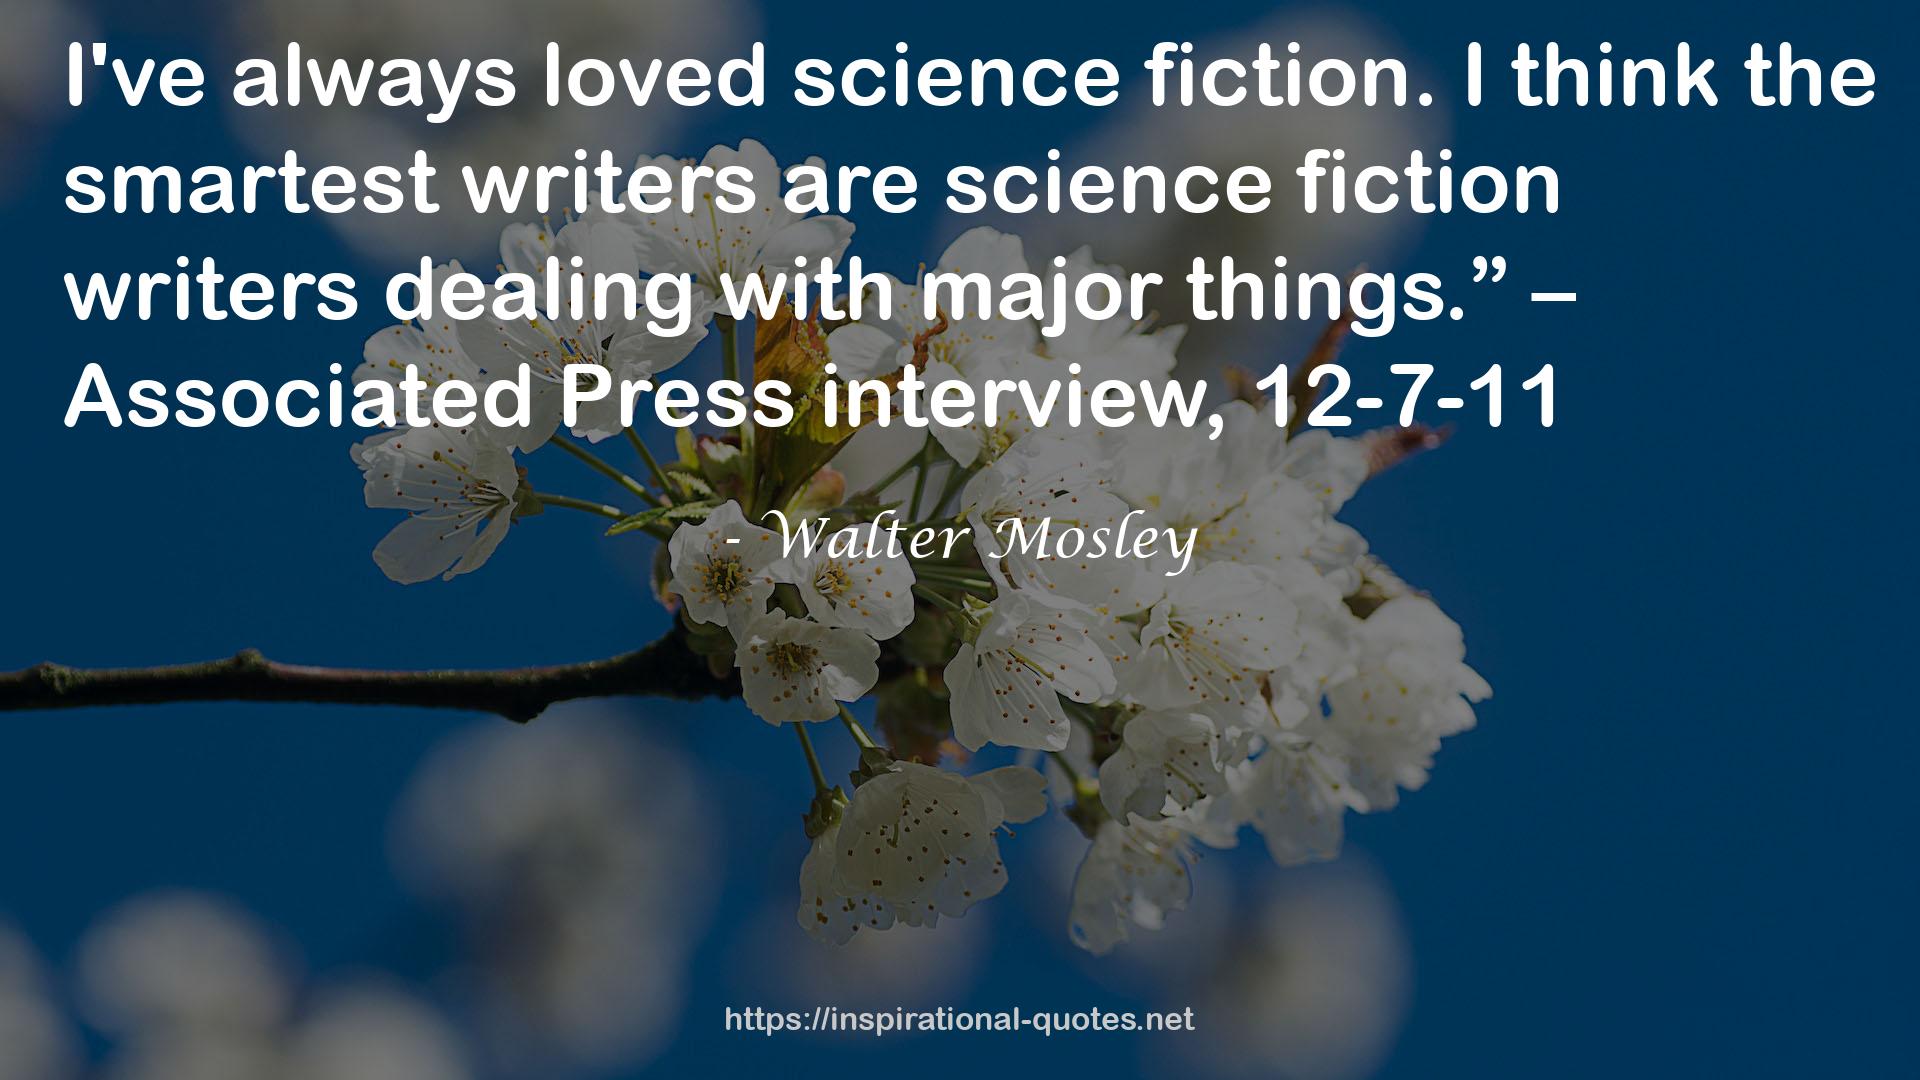 science fiction writers  QUOTES